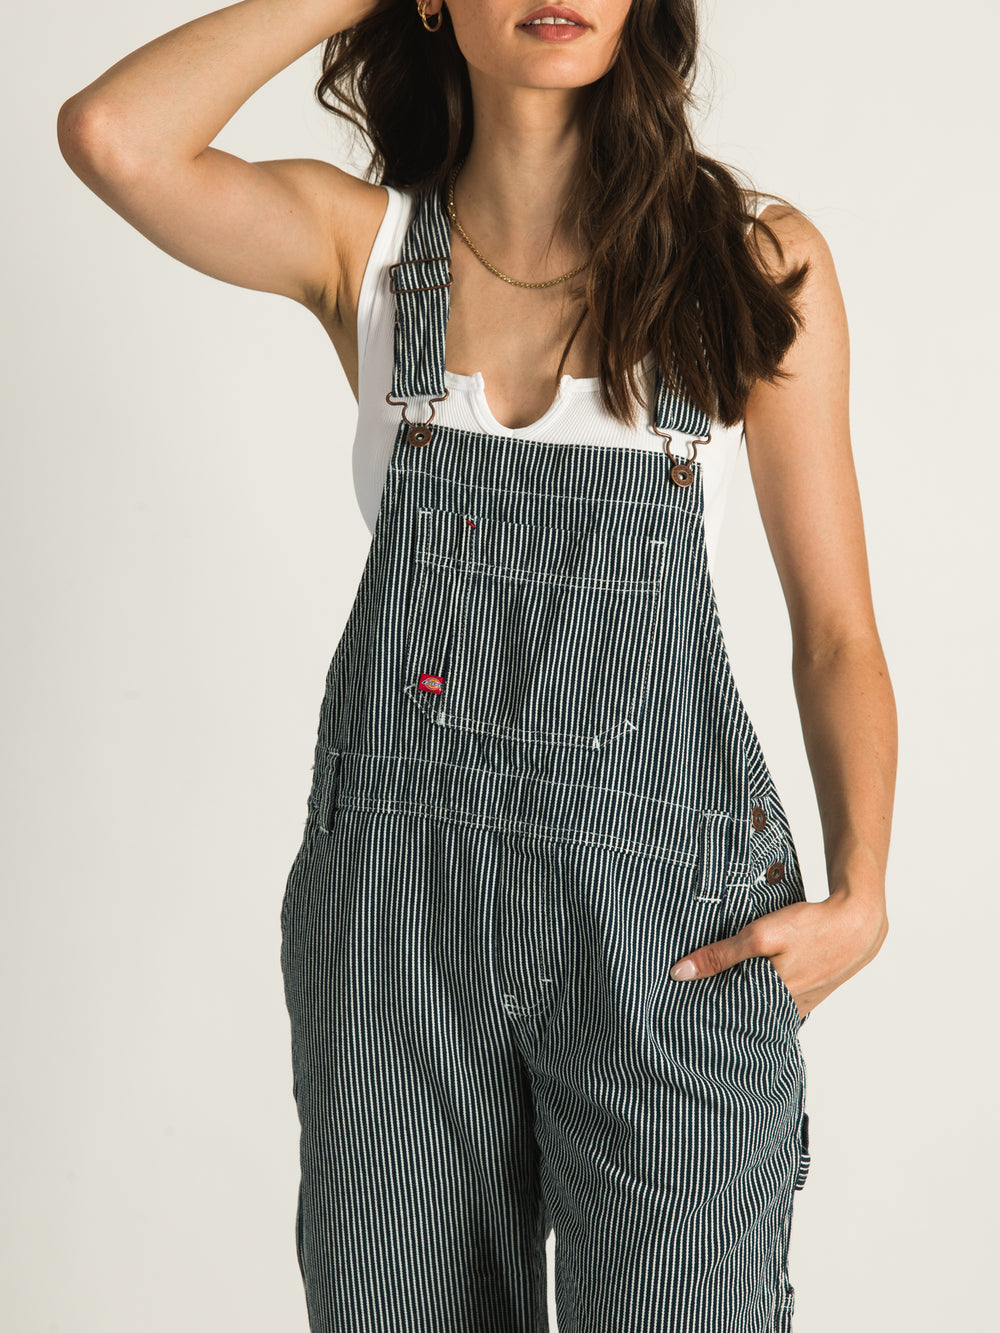 DICKIES RELAXED STRIPE BIB OVERALL - CLEARANCE